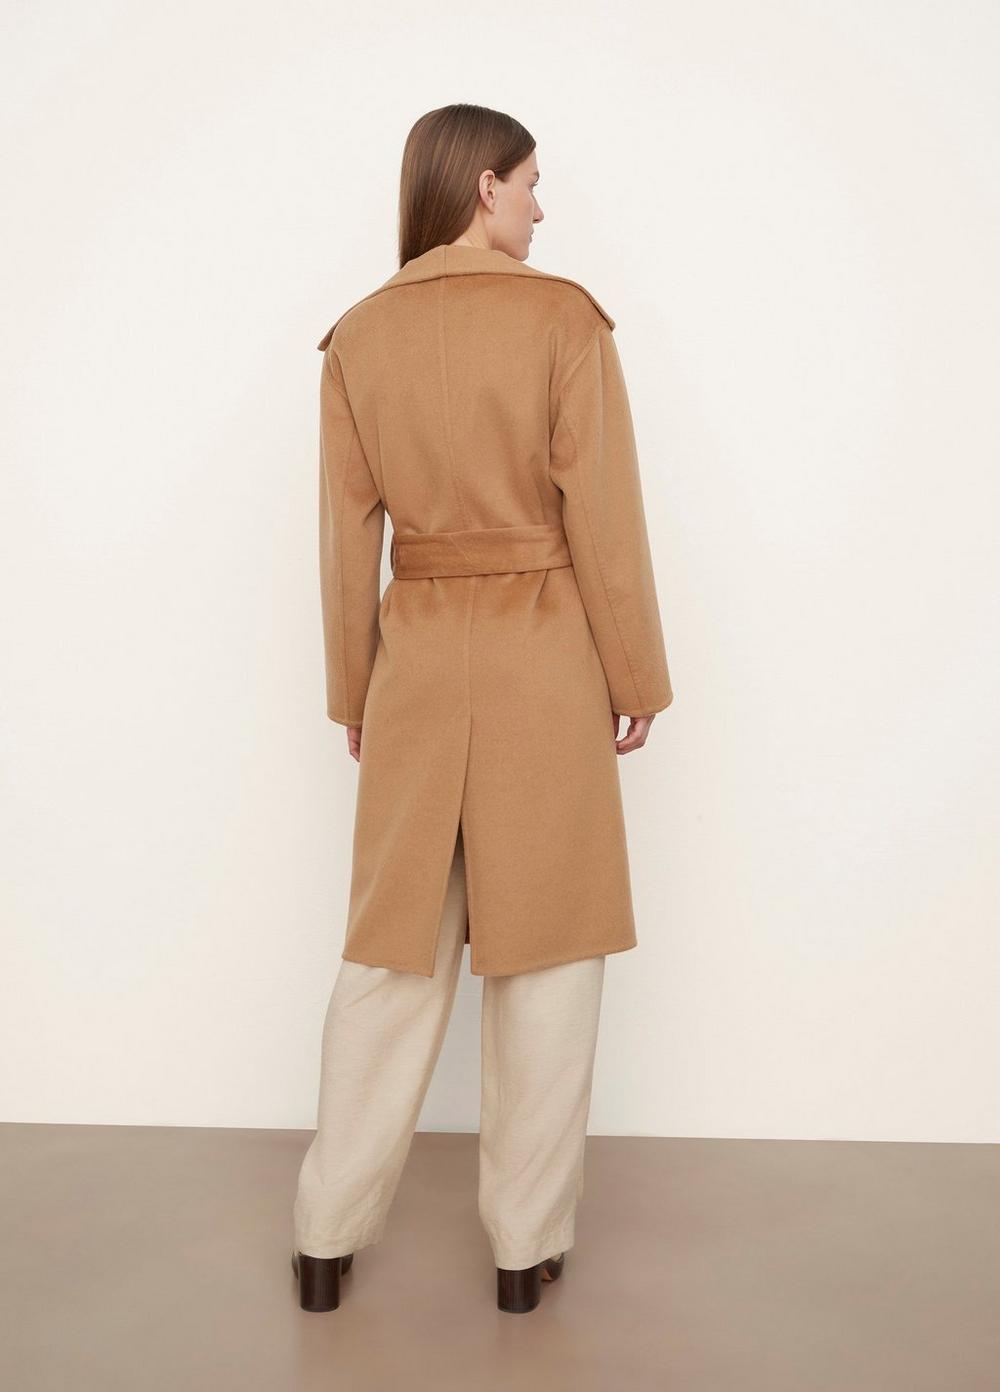 Wool and Cashmere Belted Drape-Neck Coat in Vince Products Women